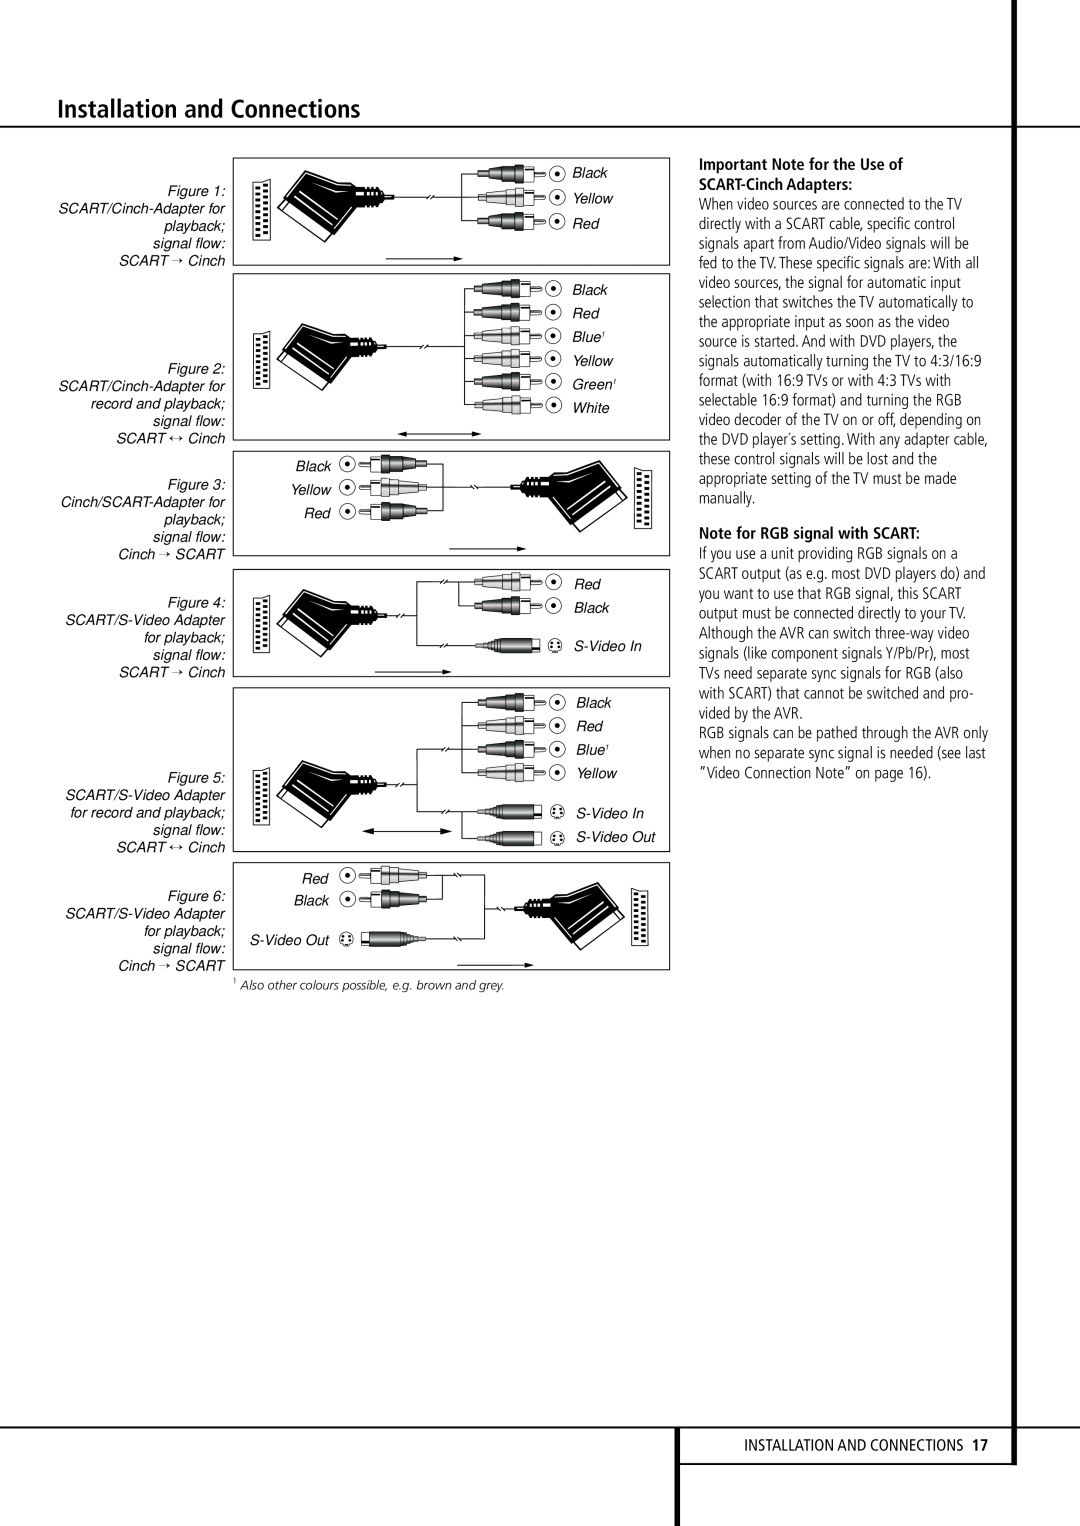 Harman-Kardon AVR 435 owner manual Important Note for the Use of SCART-CinchAdapters, Note for RGB signal with SCART 